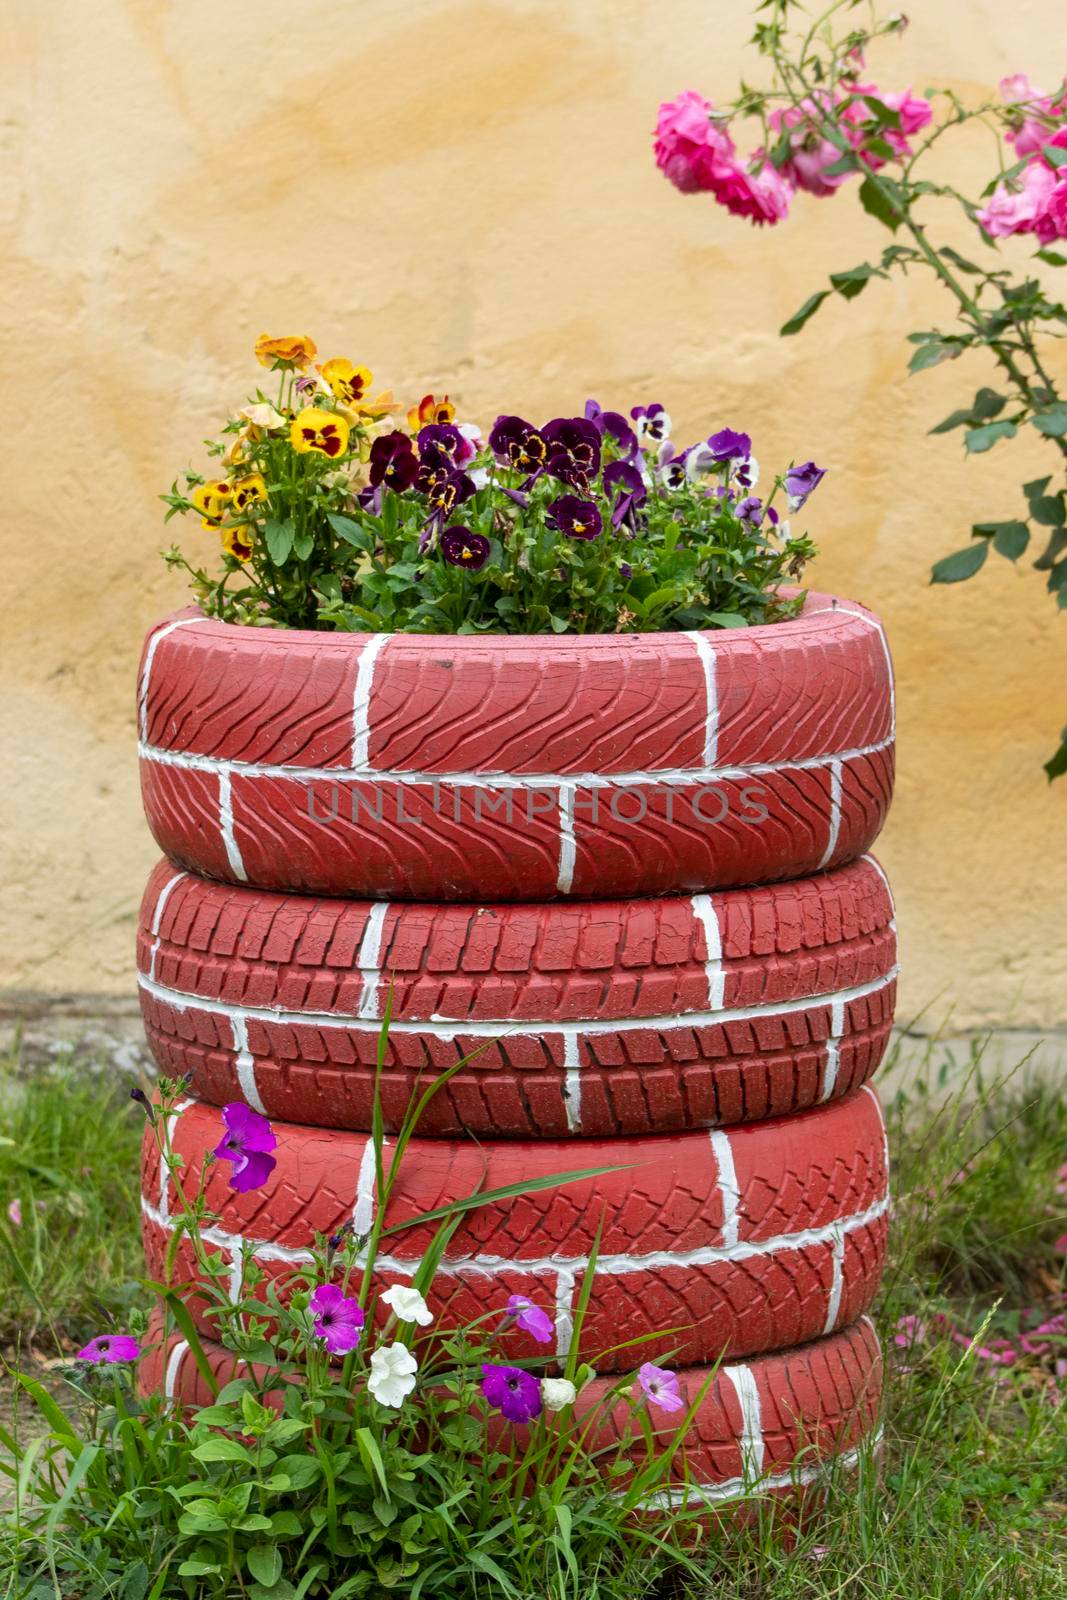 Spring flowers that are inside the tires by bybyphotography